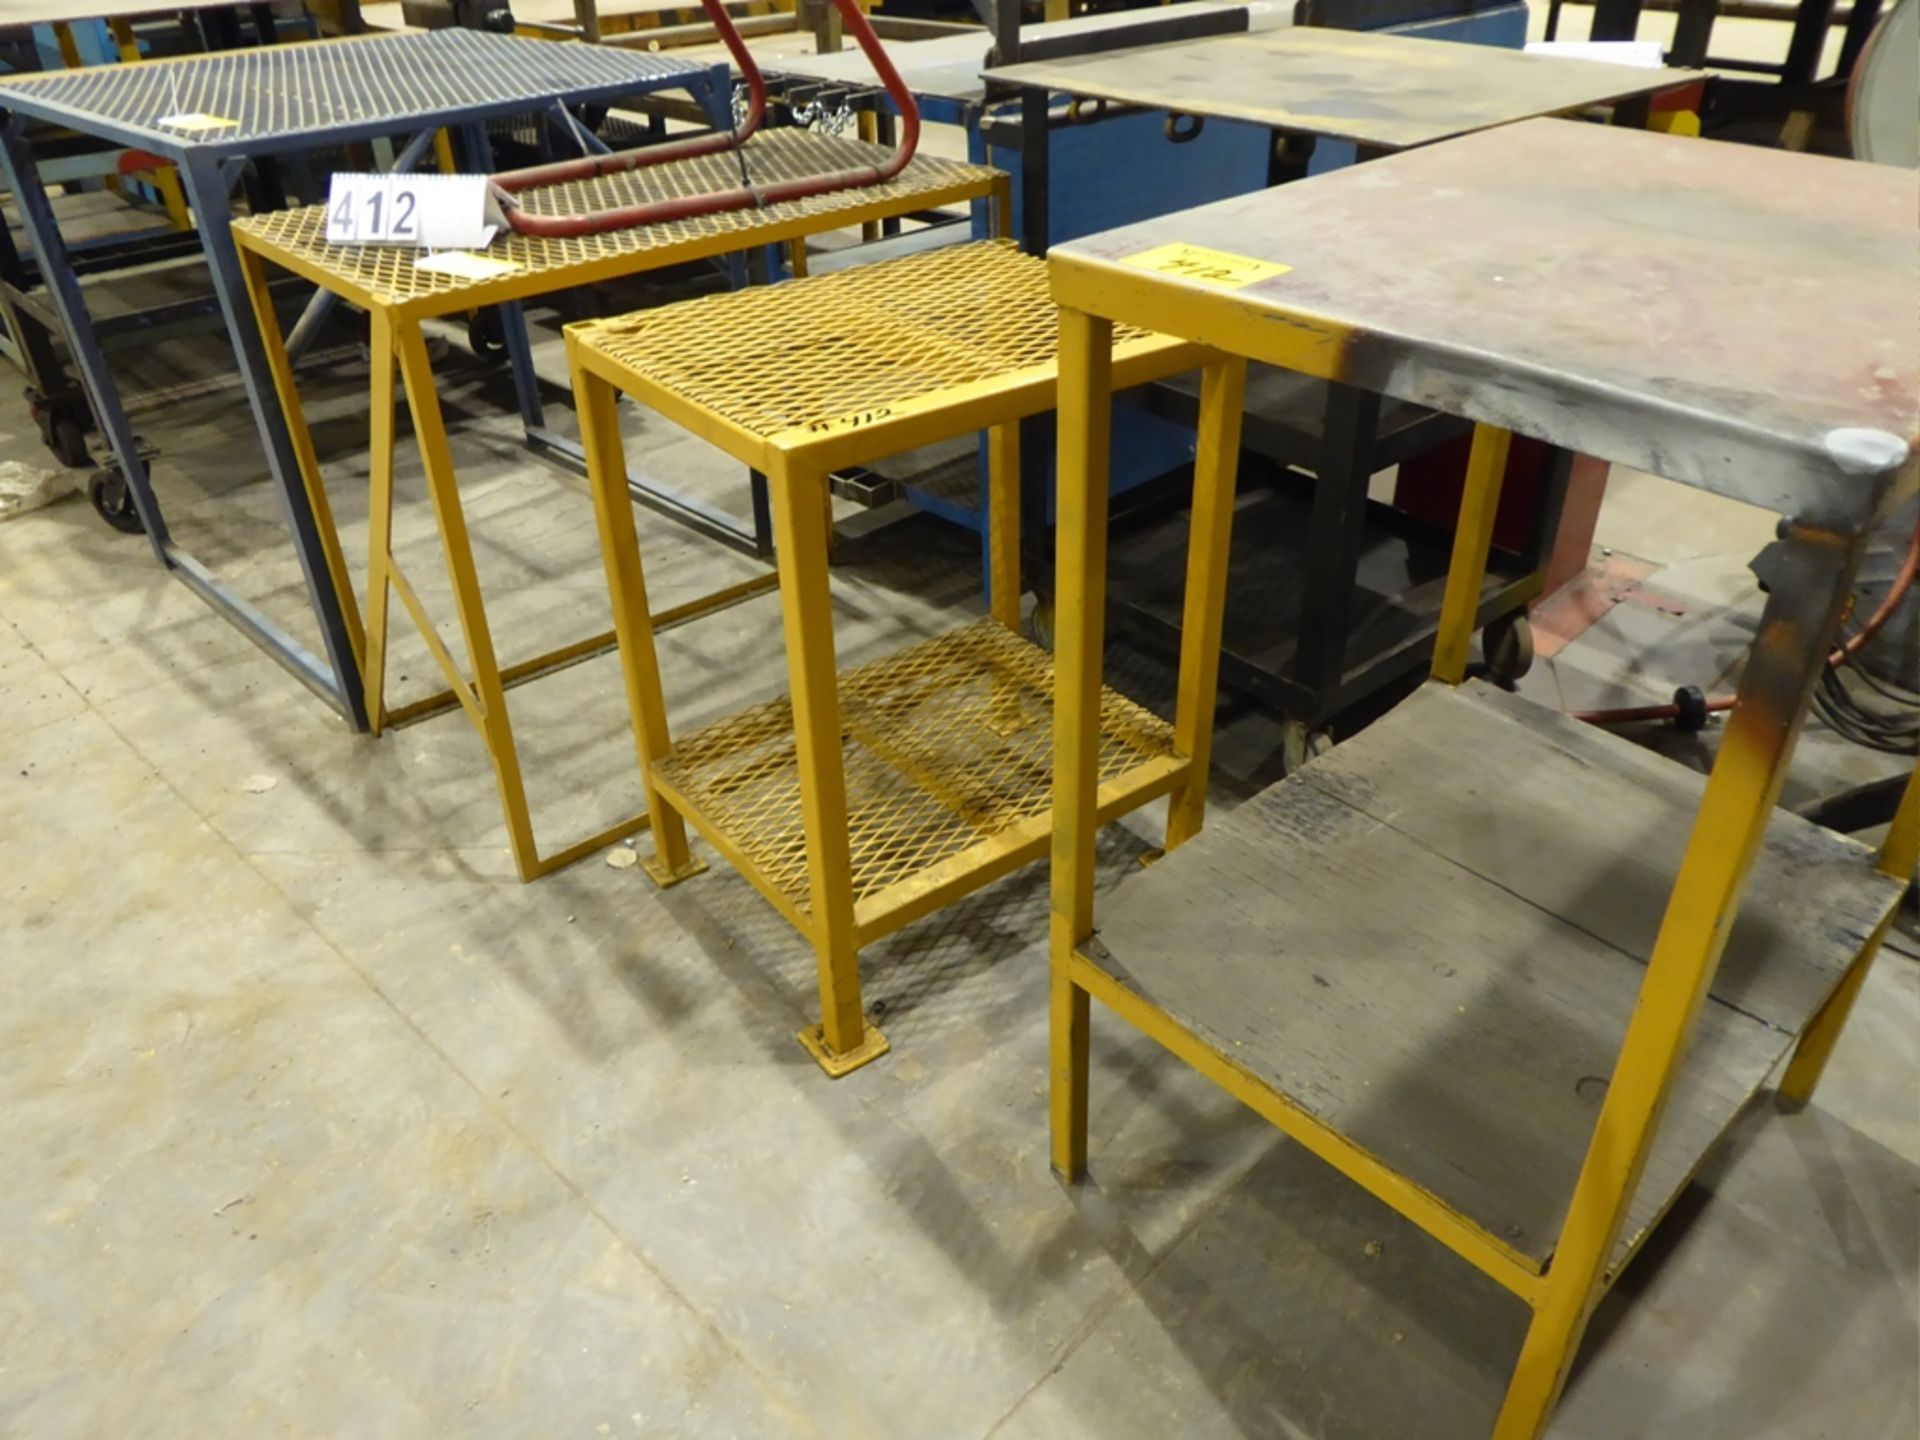 L/O 3 EXPANDED METAL TABLES - Image 2 of 2